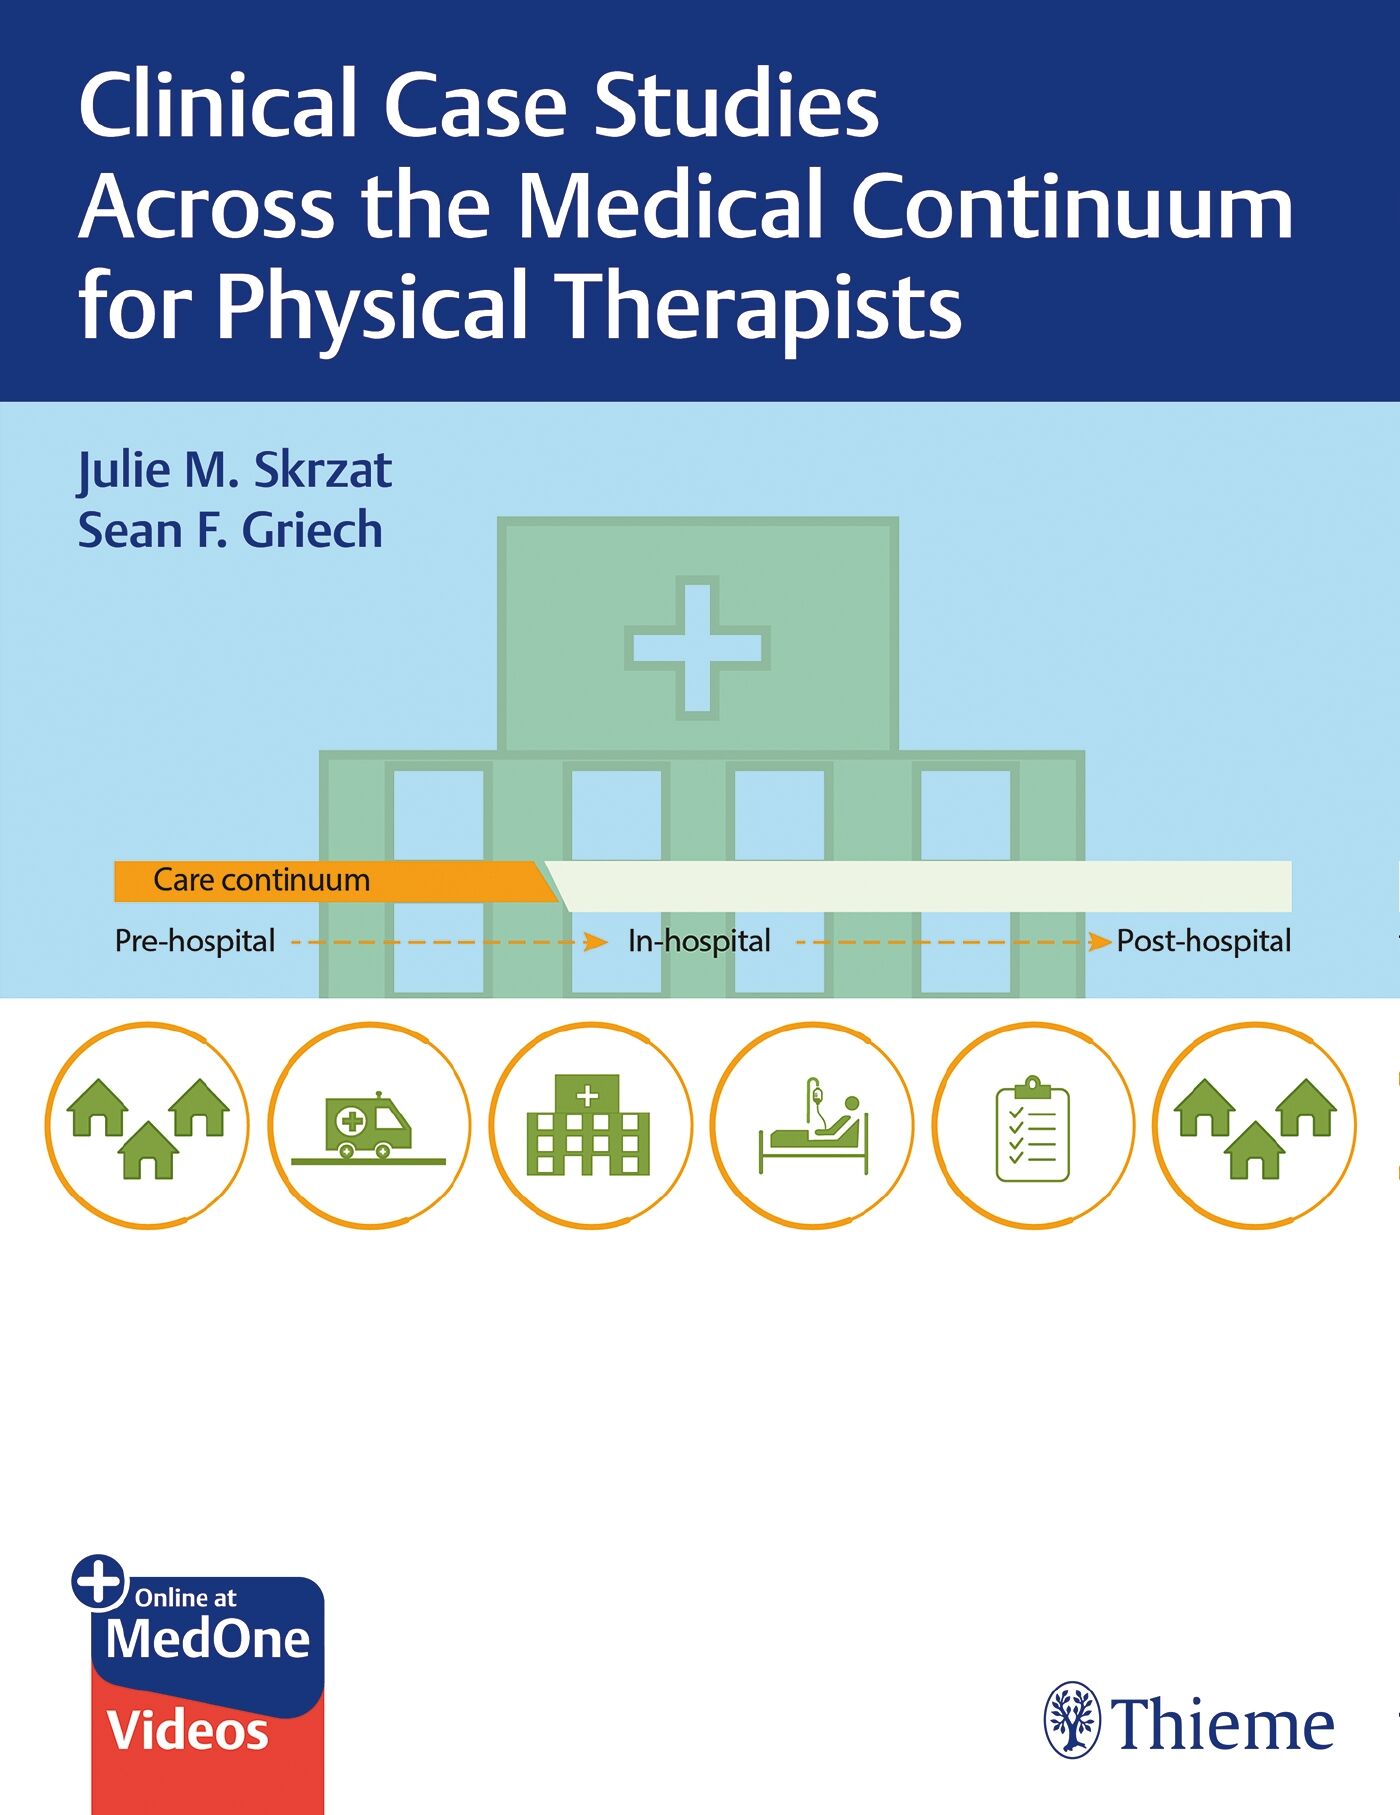 Clinical Case Studies Across the Medical Continuum for Physical Therapists, 9781638536925